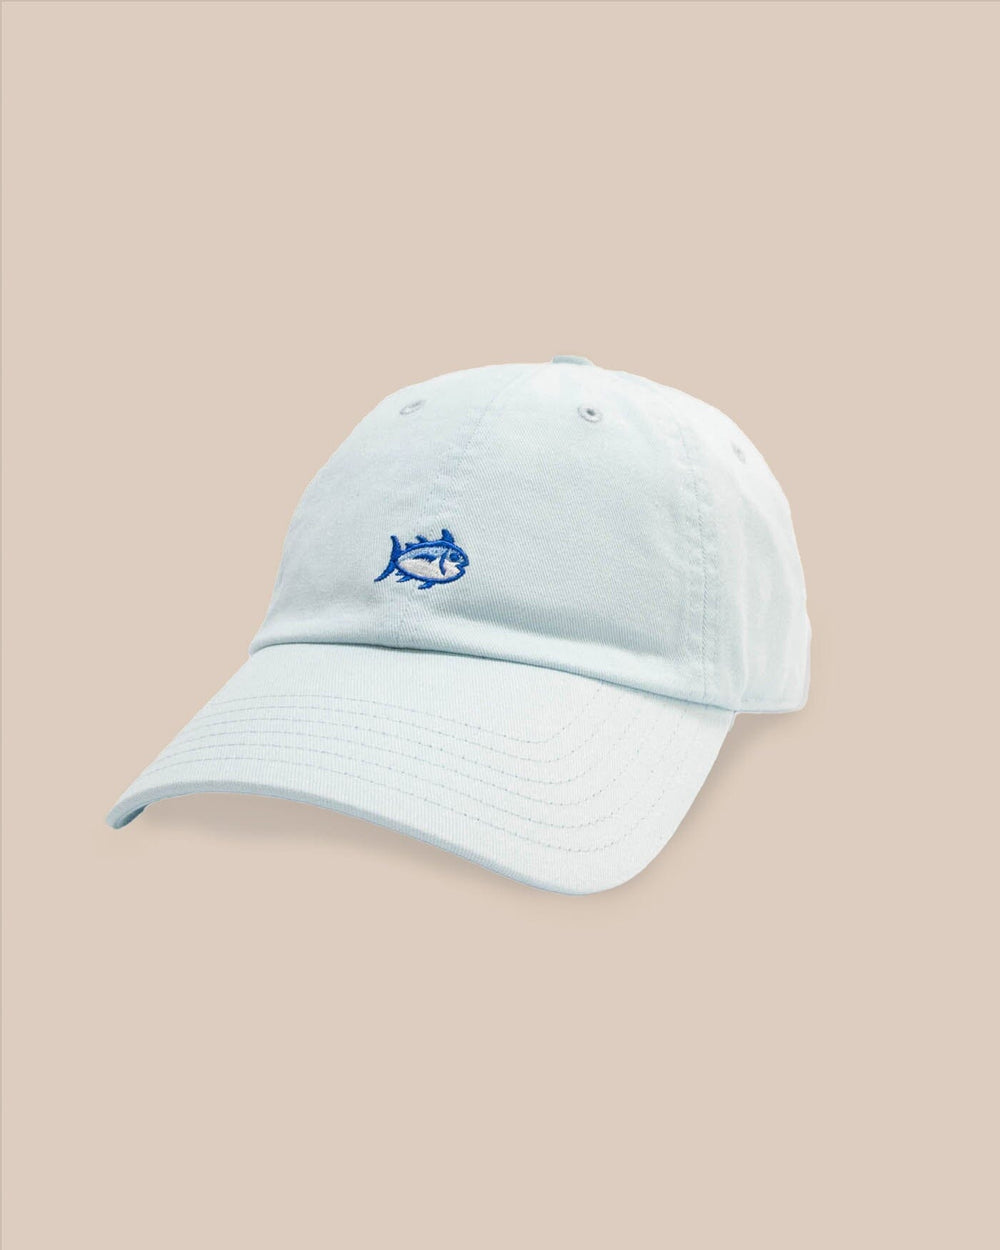 The front view of the Southern Tide Mini Skipjack Leather Strap Hat by Southern Tide - Blue